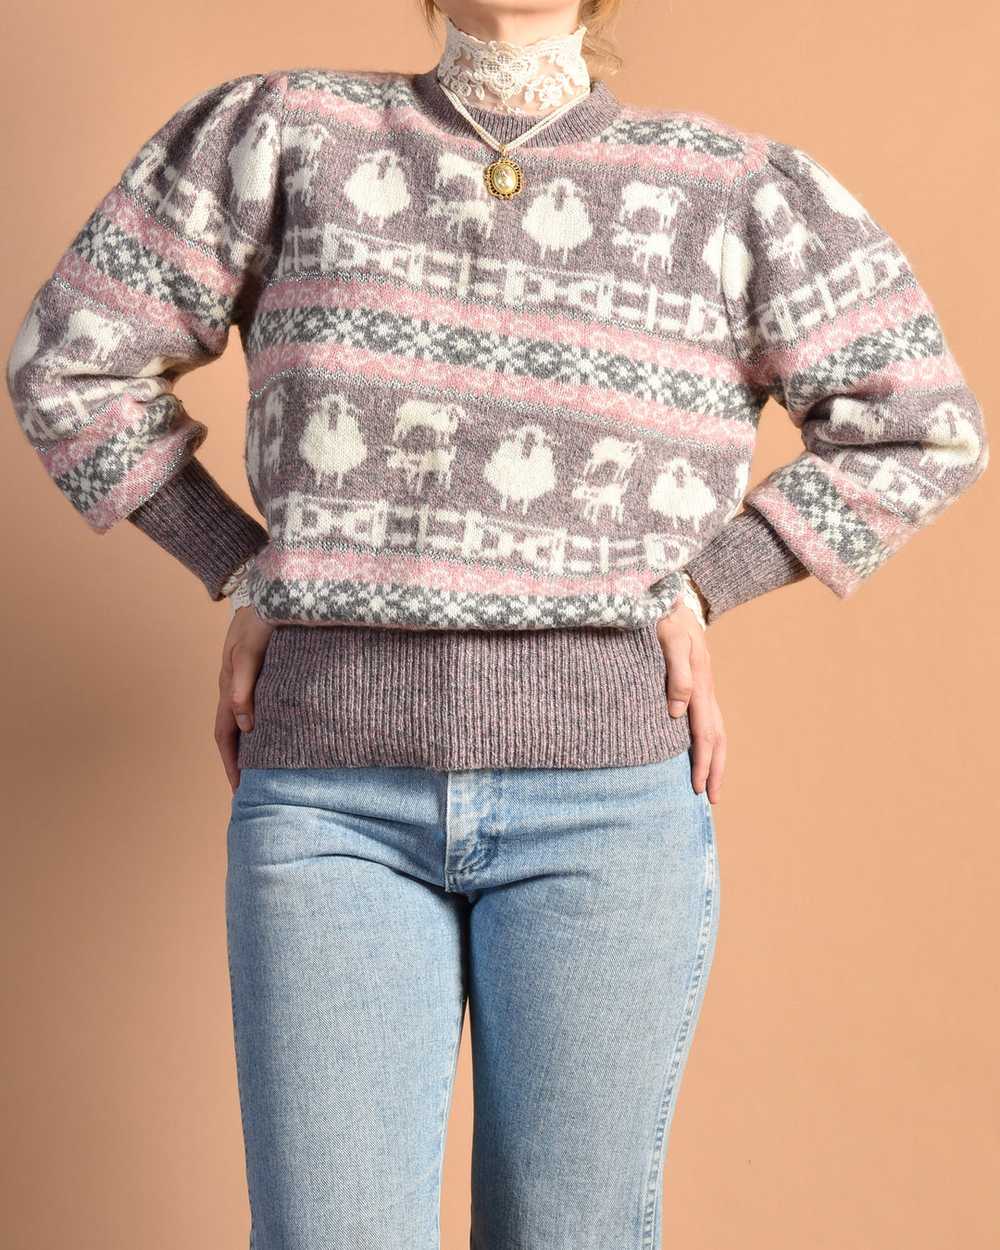 Dorian 1980s Sparkly Wool Sheep Sweater - image 5